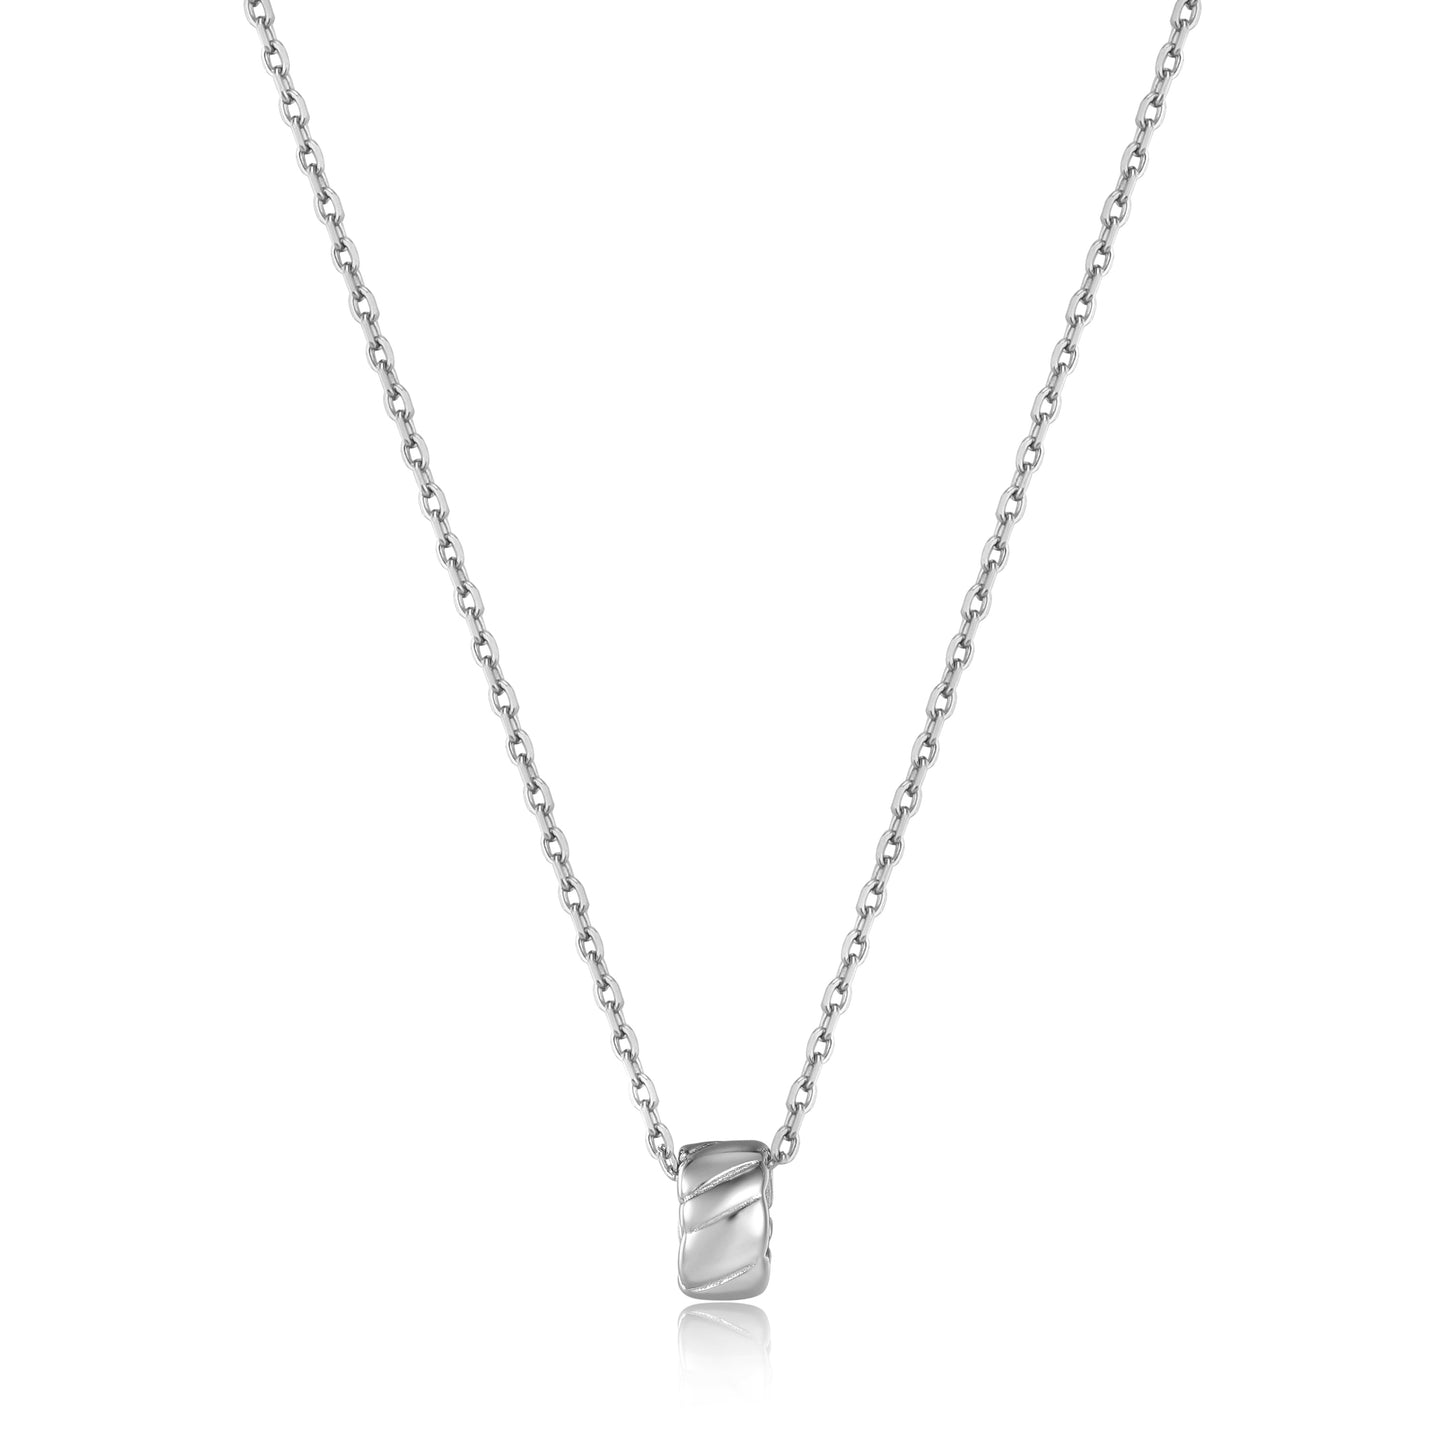 Ania Haie Silver Smooth Twist Pendant Necklace - Silver Necklace